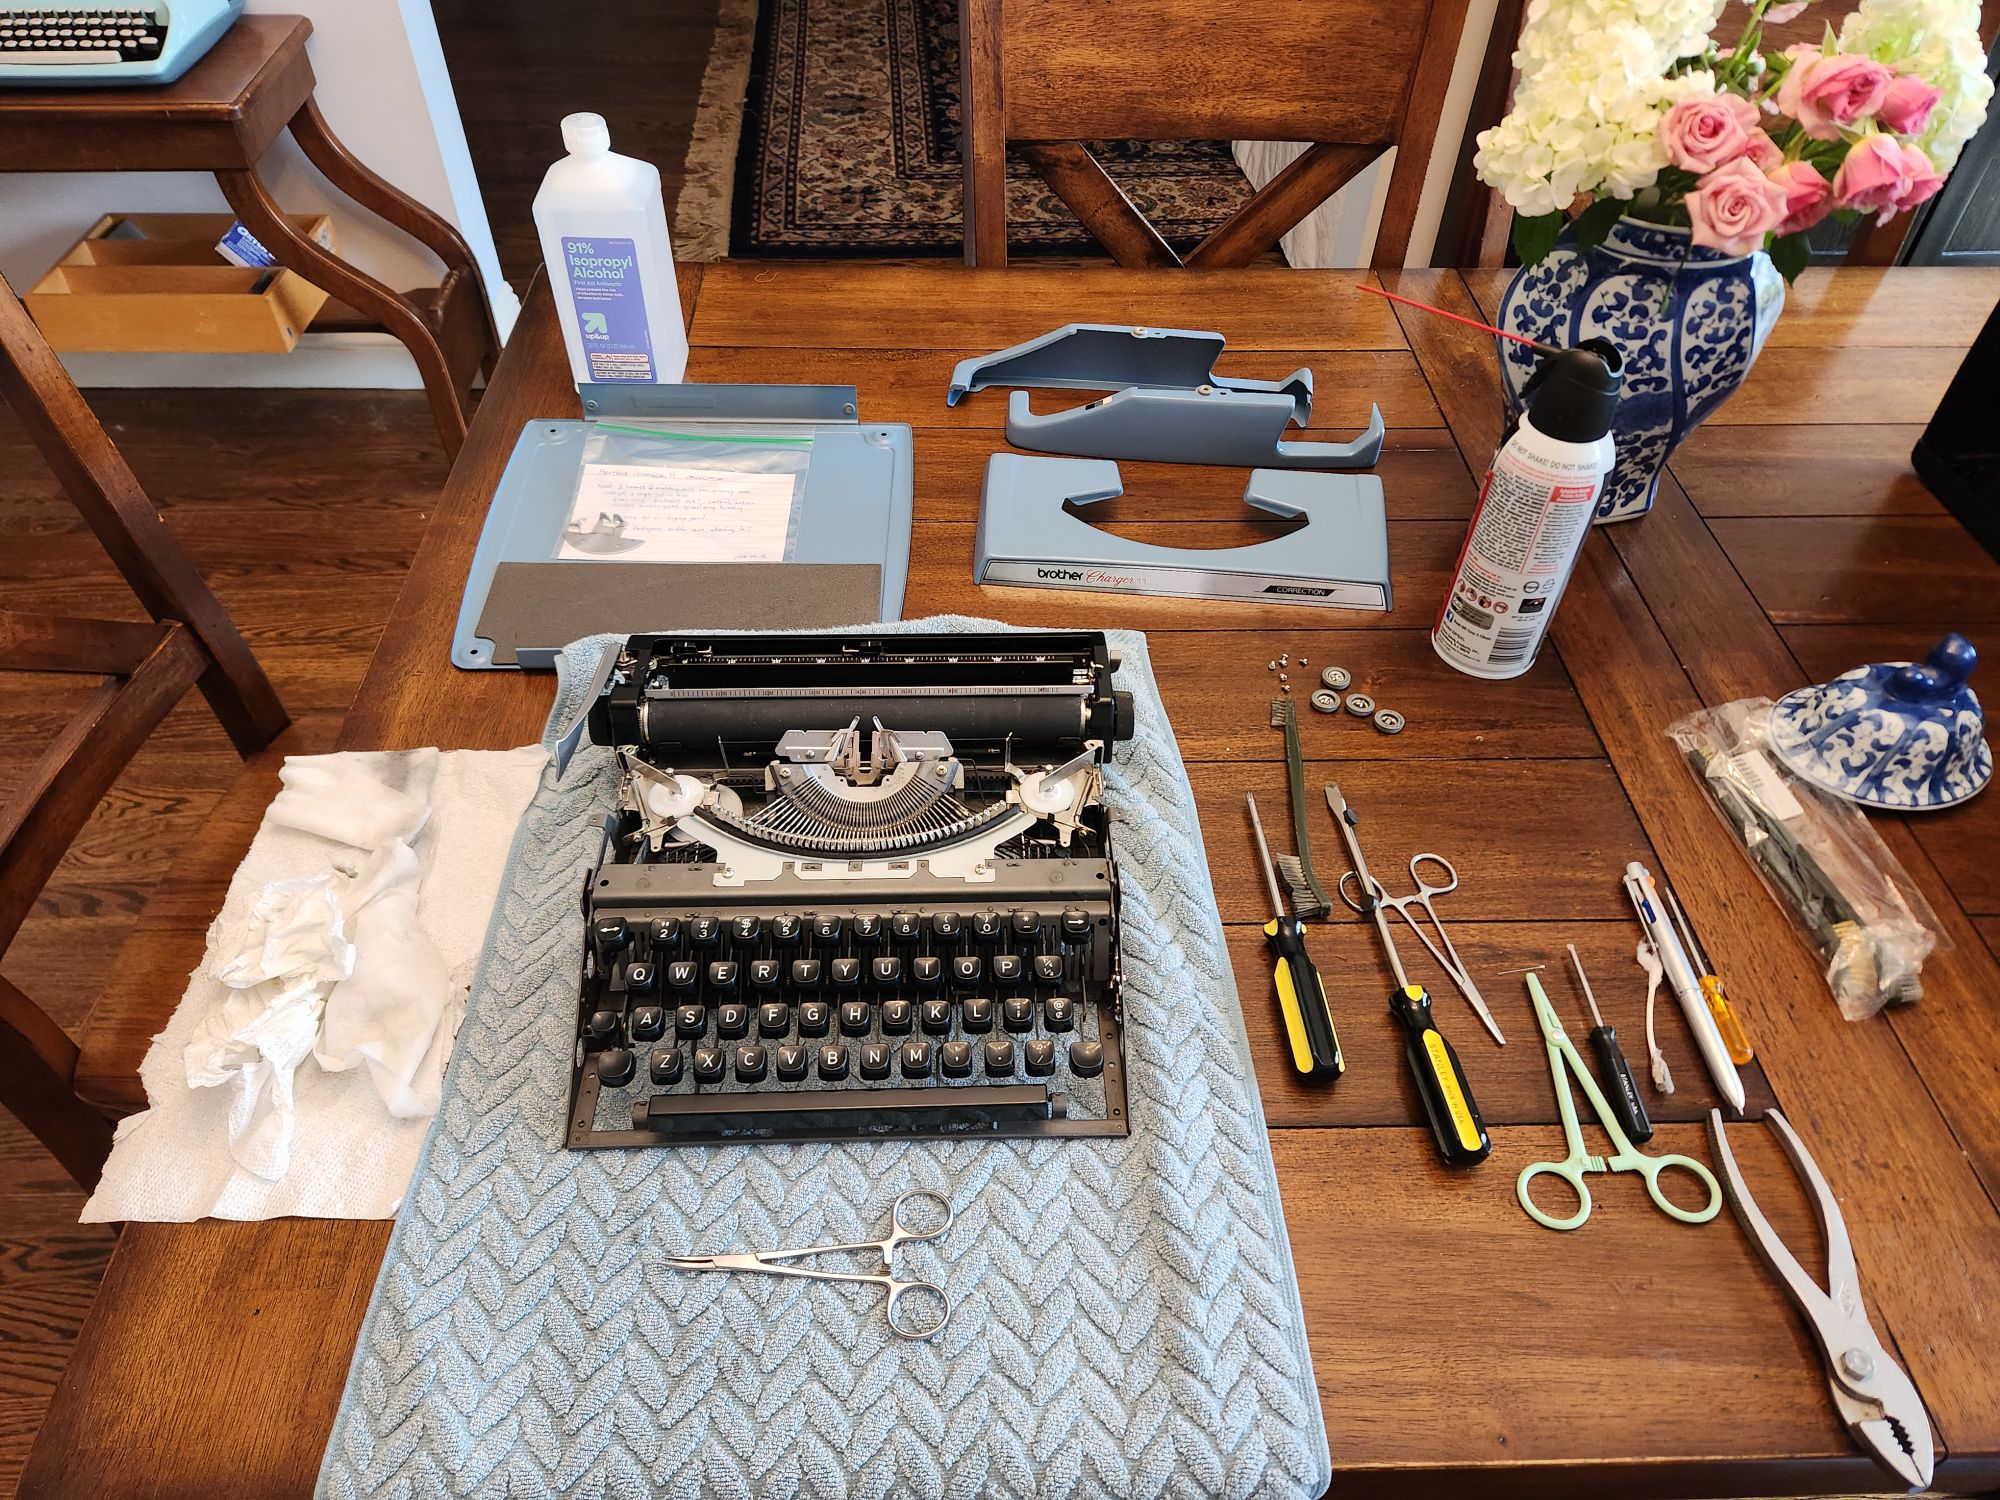 Wooden table with a blue towel on top of a portion. On top of that is the internal frame and components of a typewriter with the hood, bottom, and side piece of the machine sitting behind it. Strewn around it are a variety of screwdrivers and small tools as well as a can of compressed air.